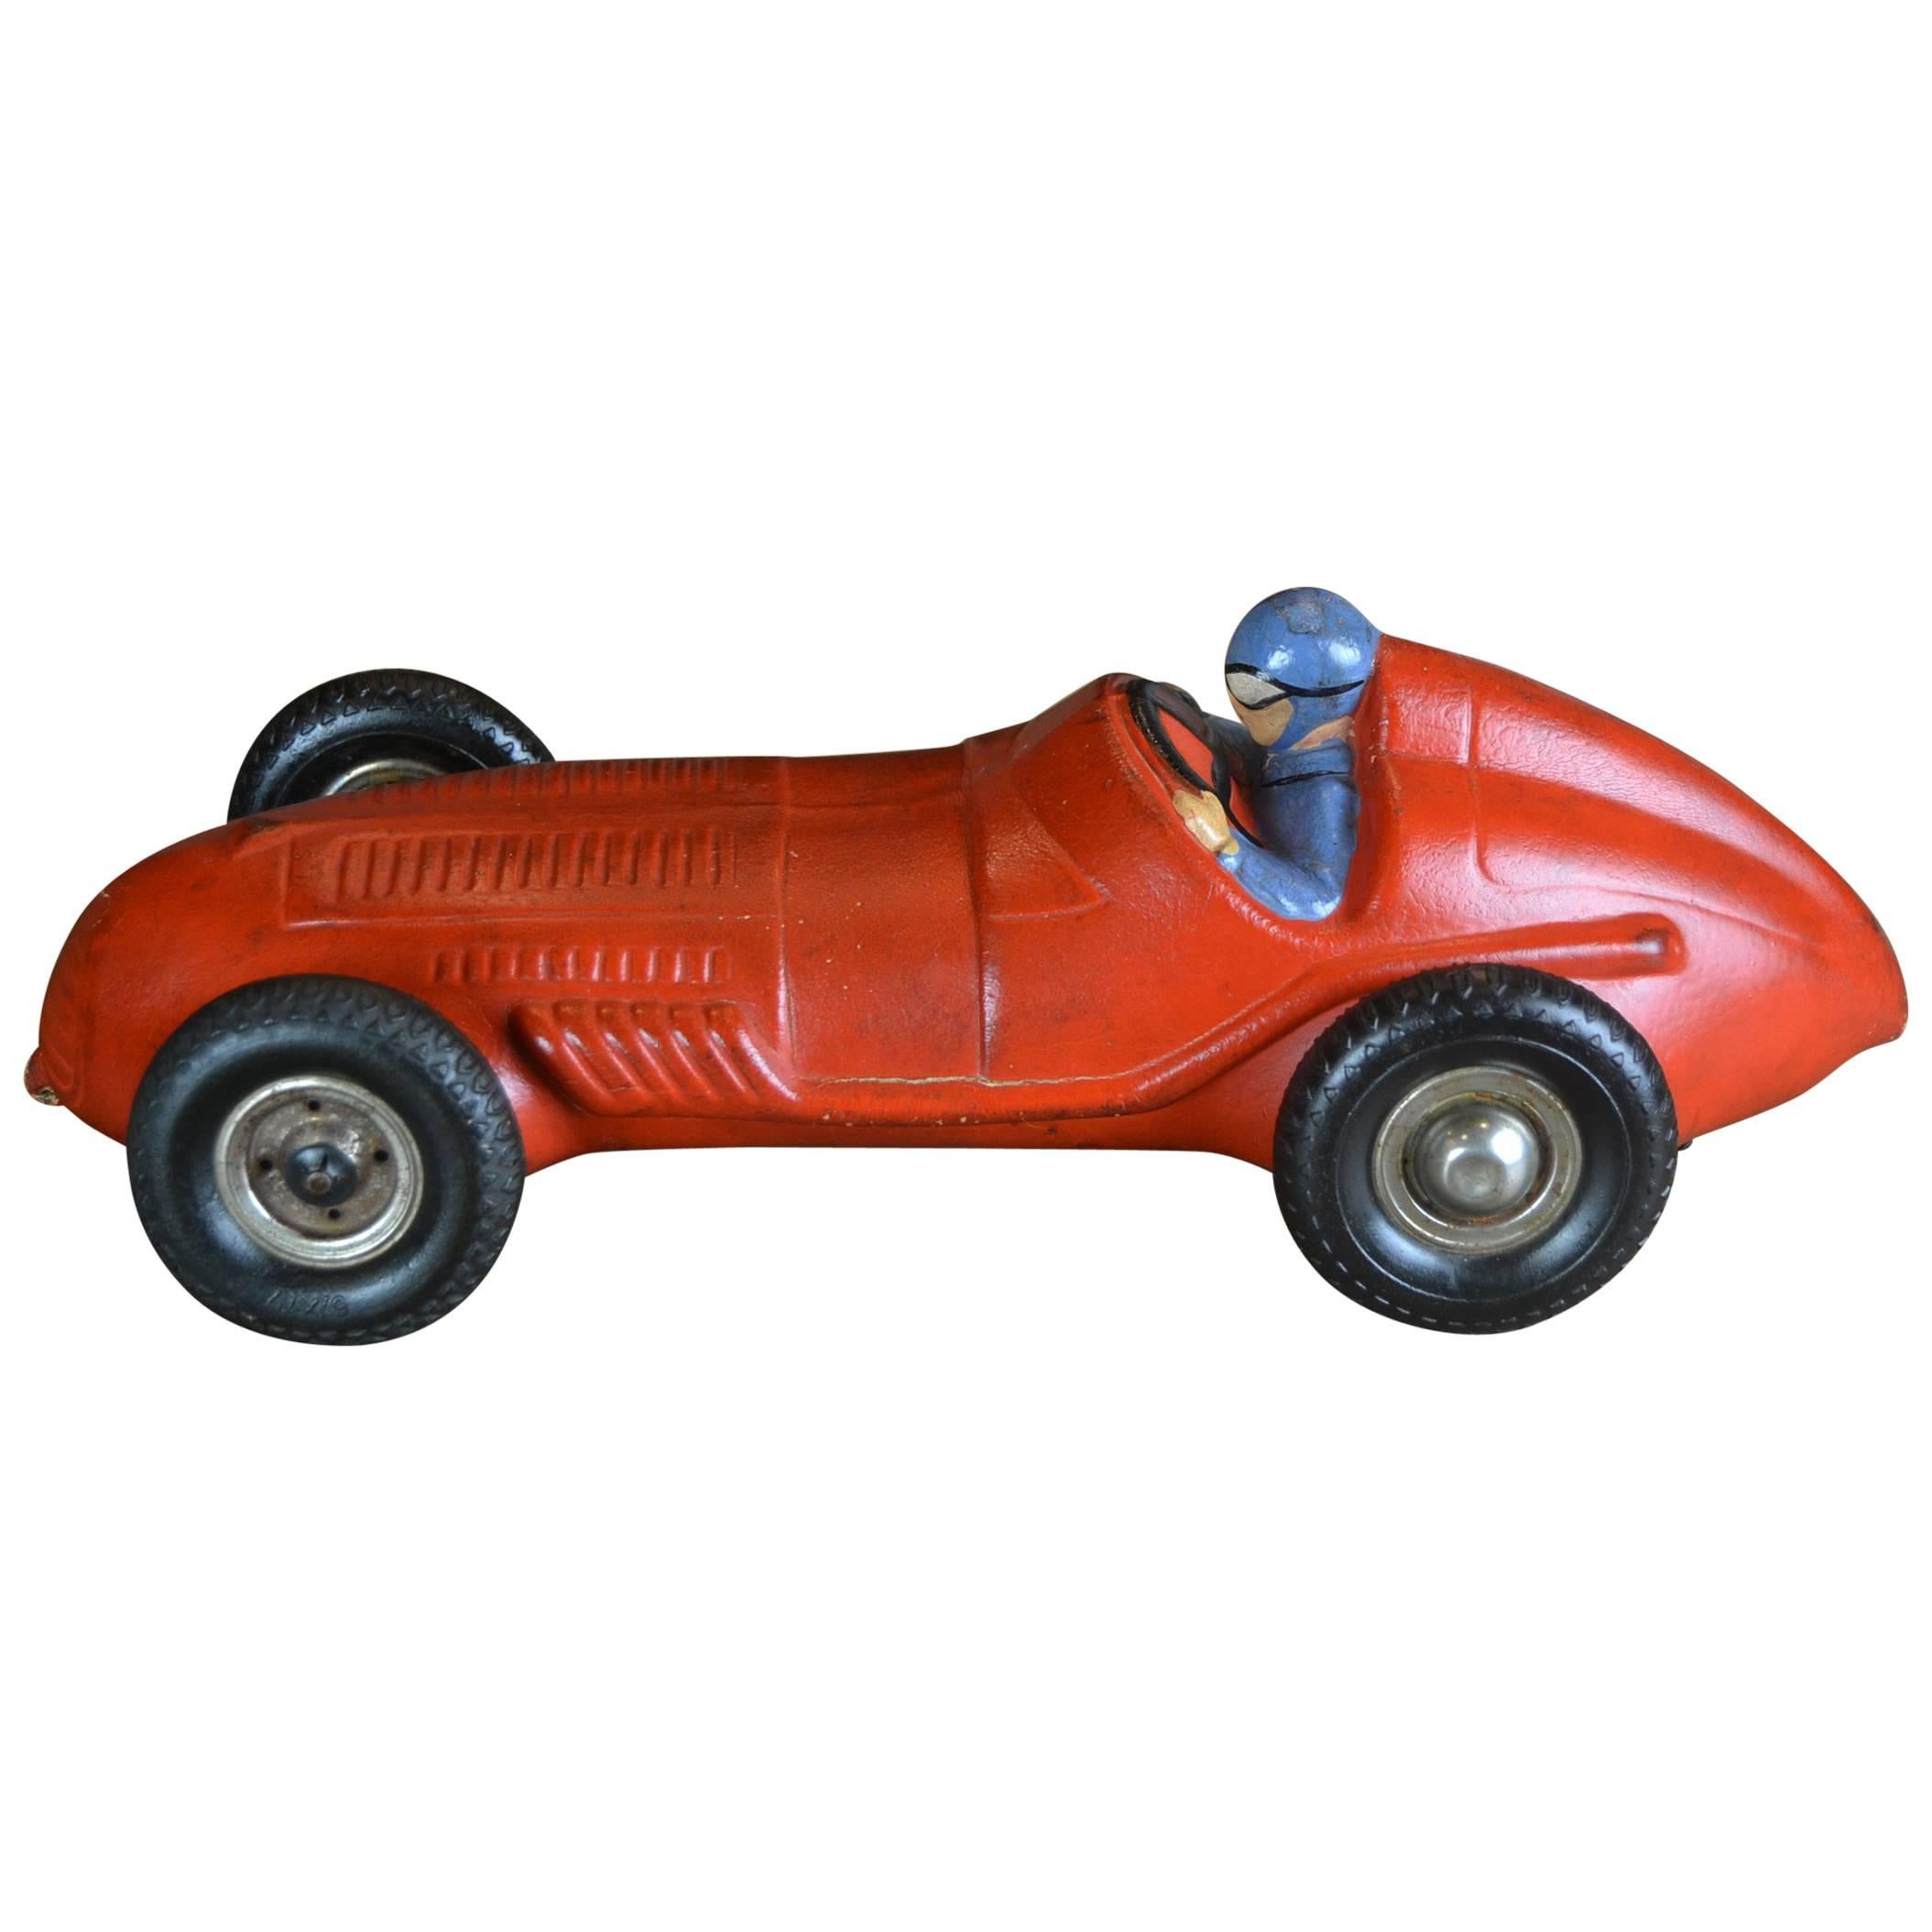 Red Racer Car Model, Racer Toy, thick heavy Rubber , 1940s 